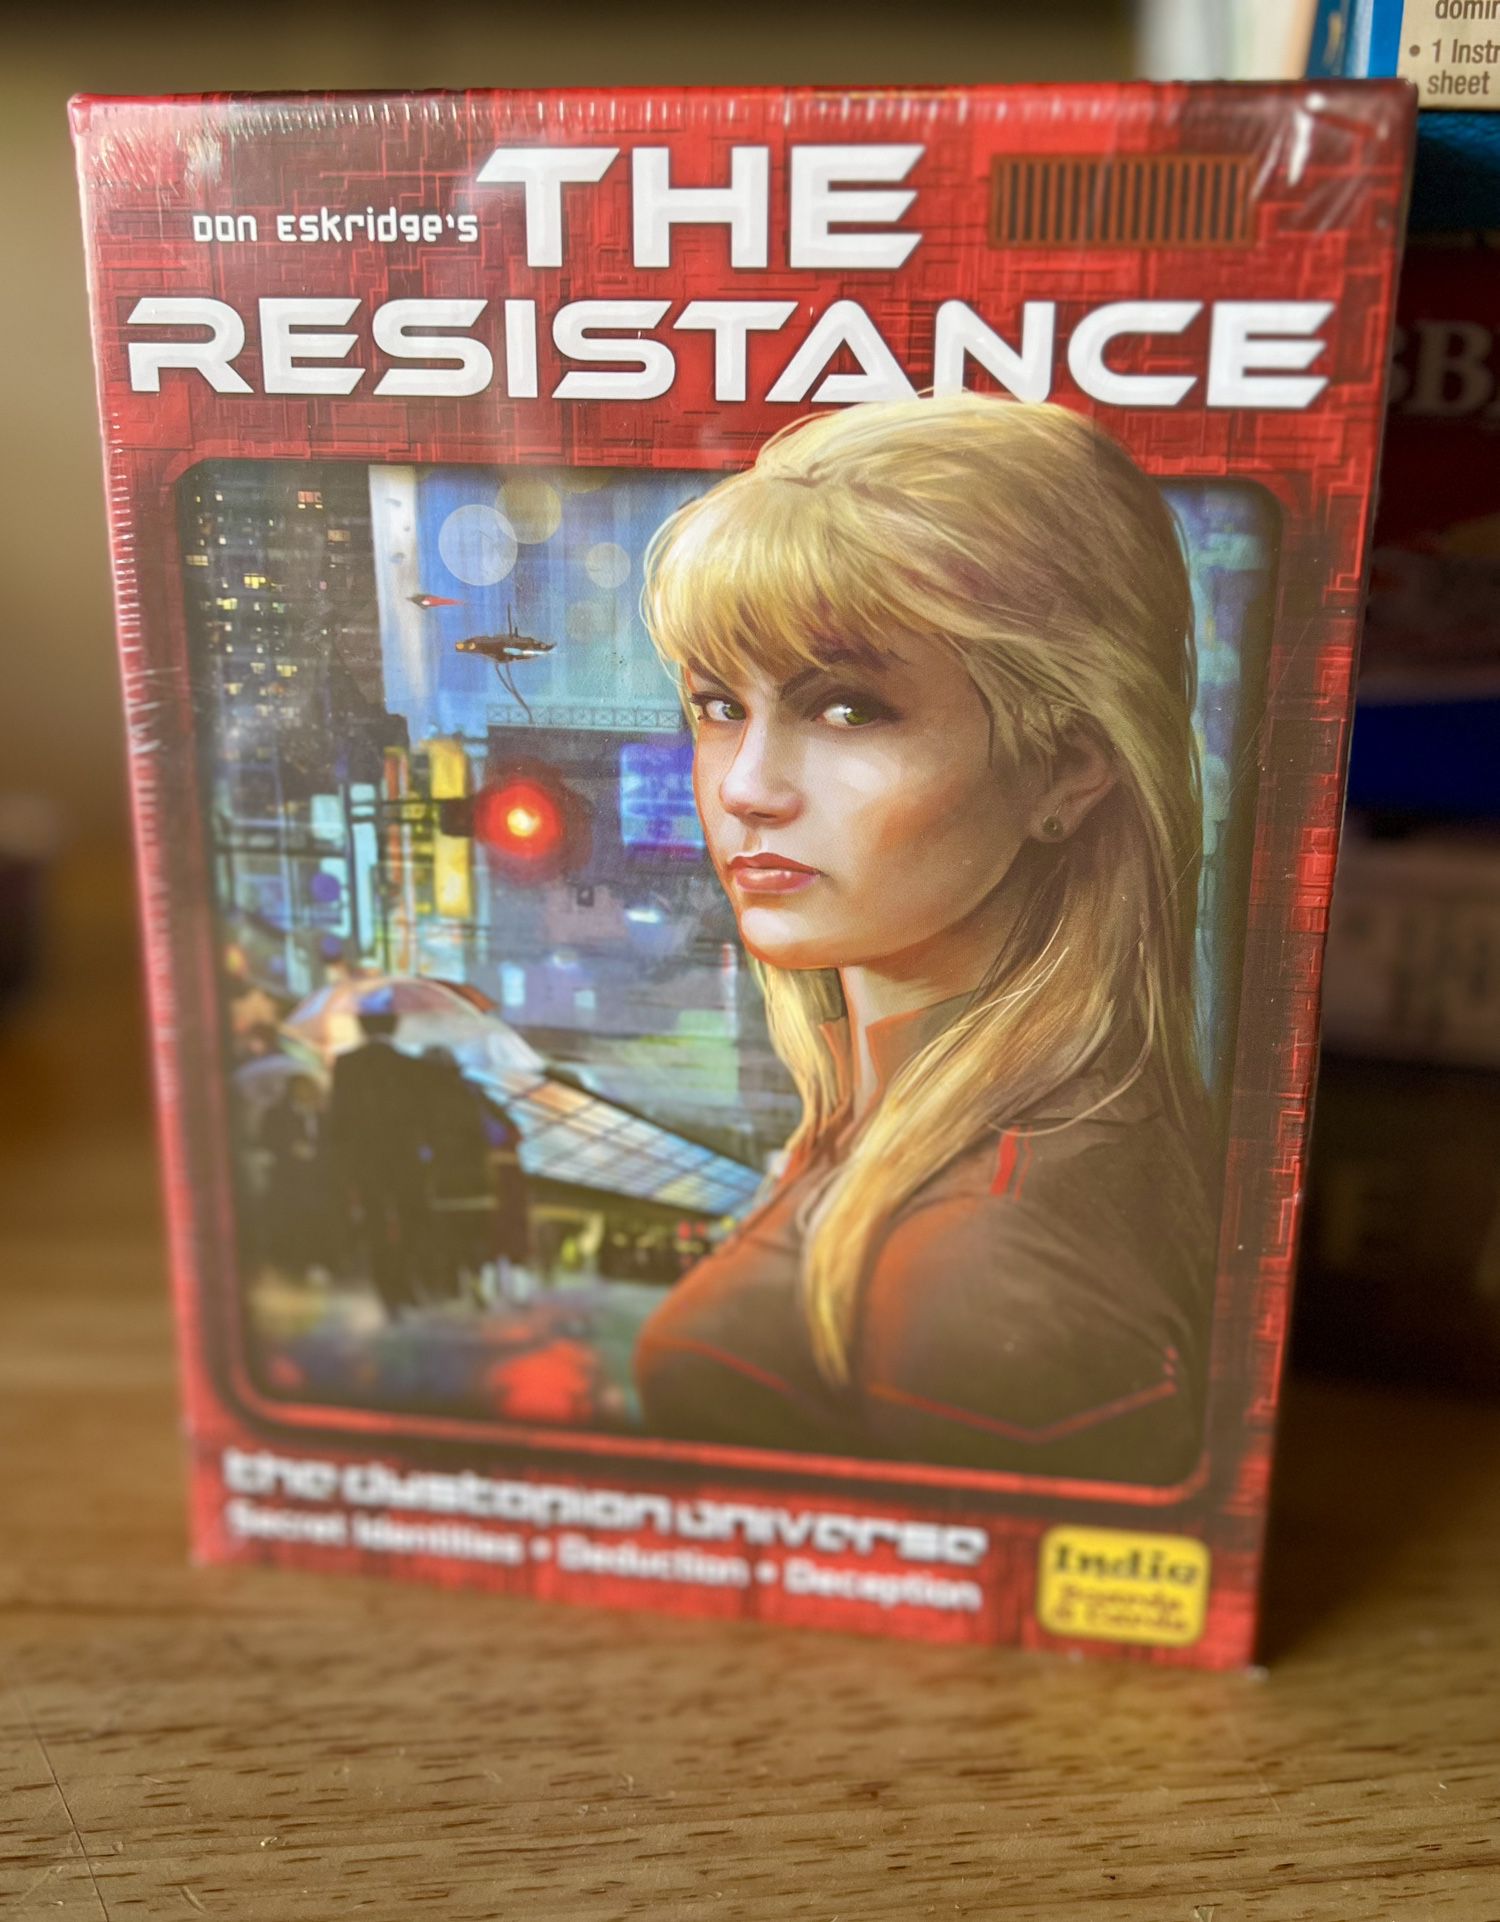 New The Resistance Game - $5 